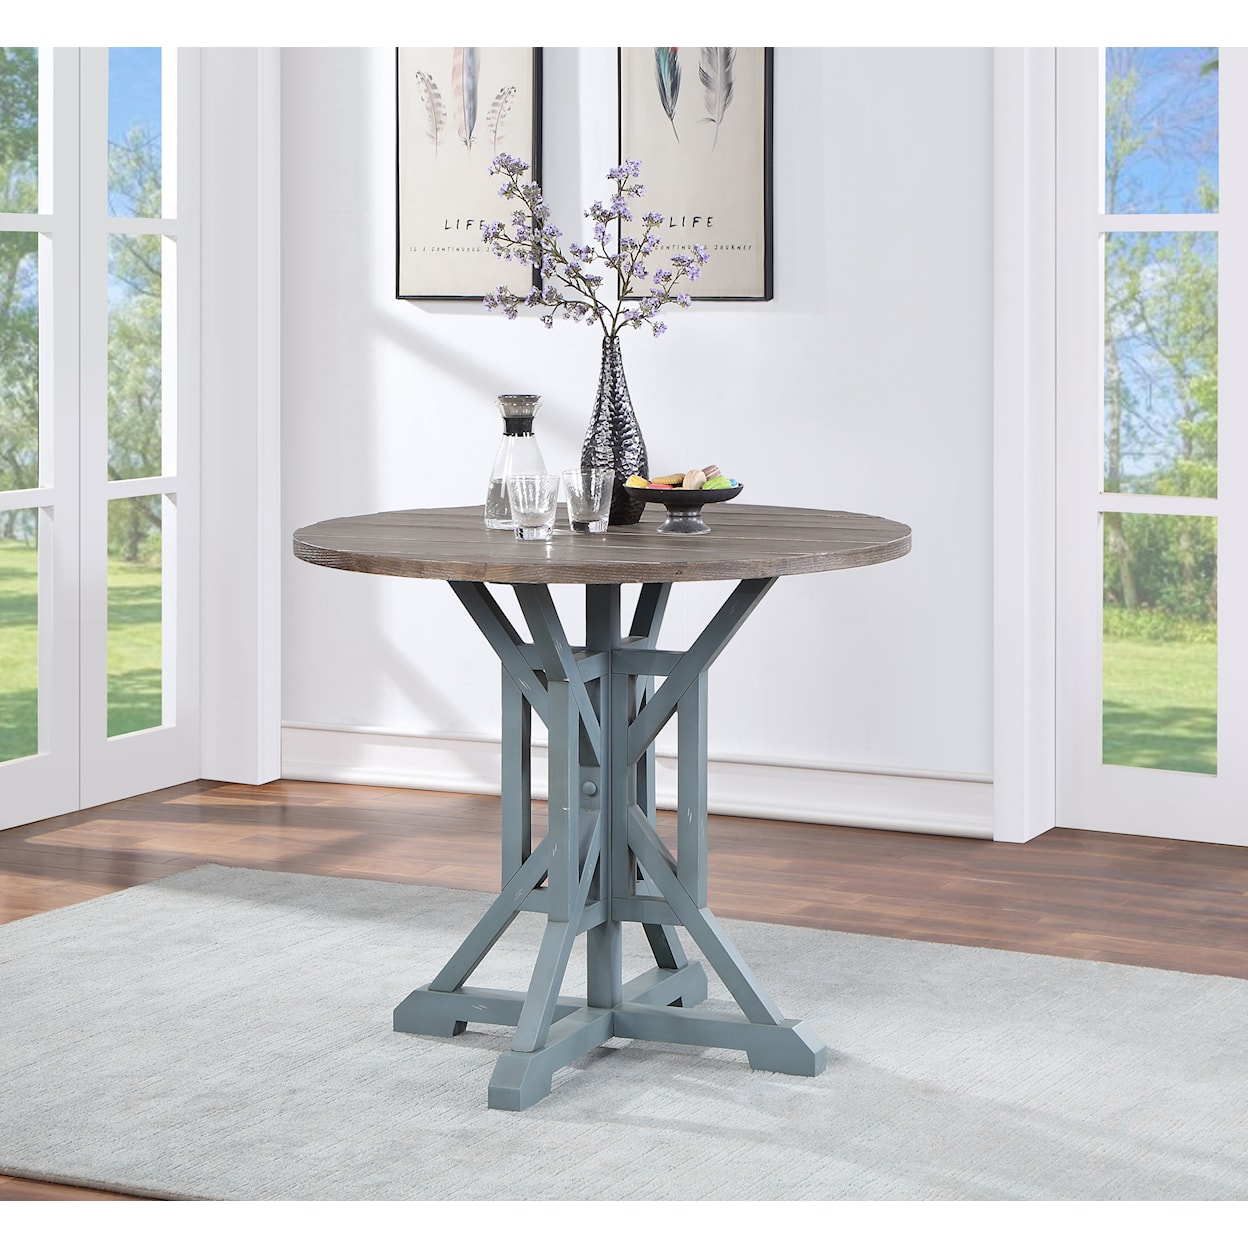 C2C Bar Harbor Counter-Height Dining Table